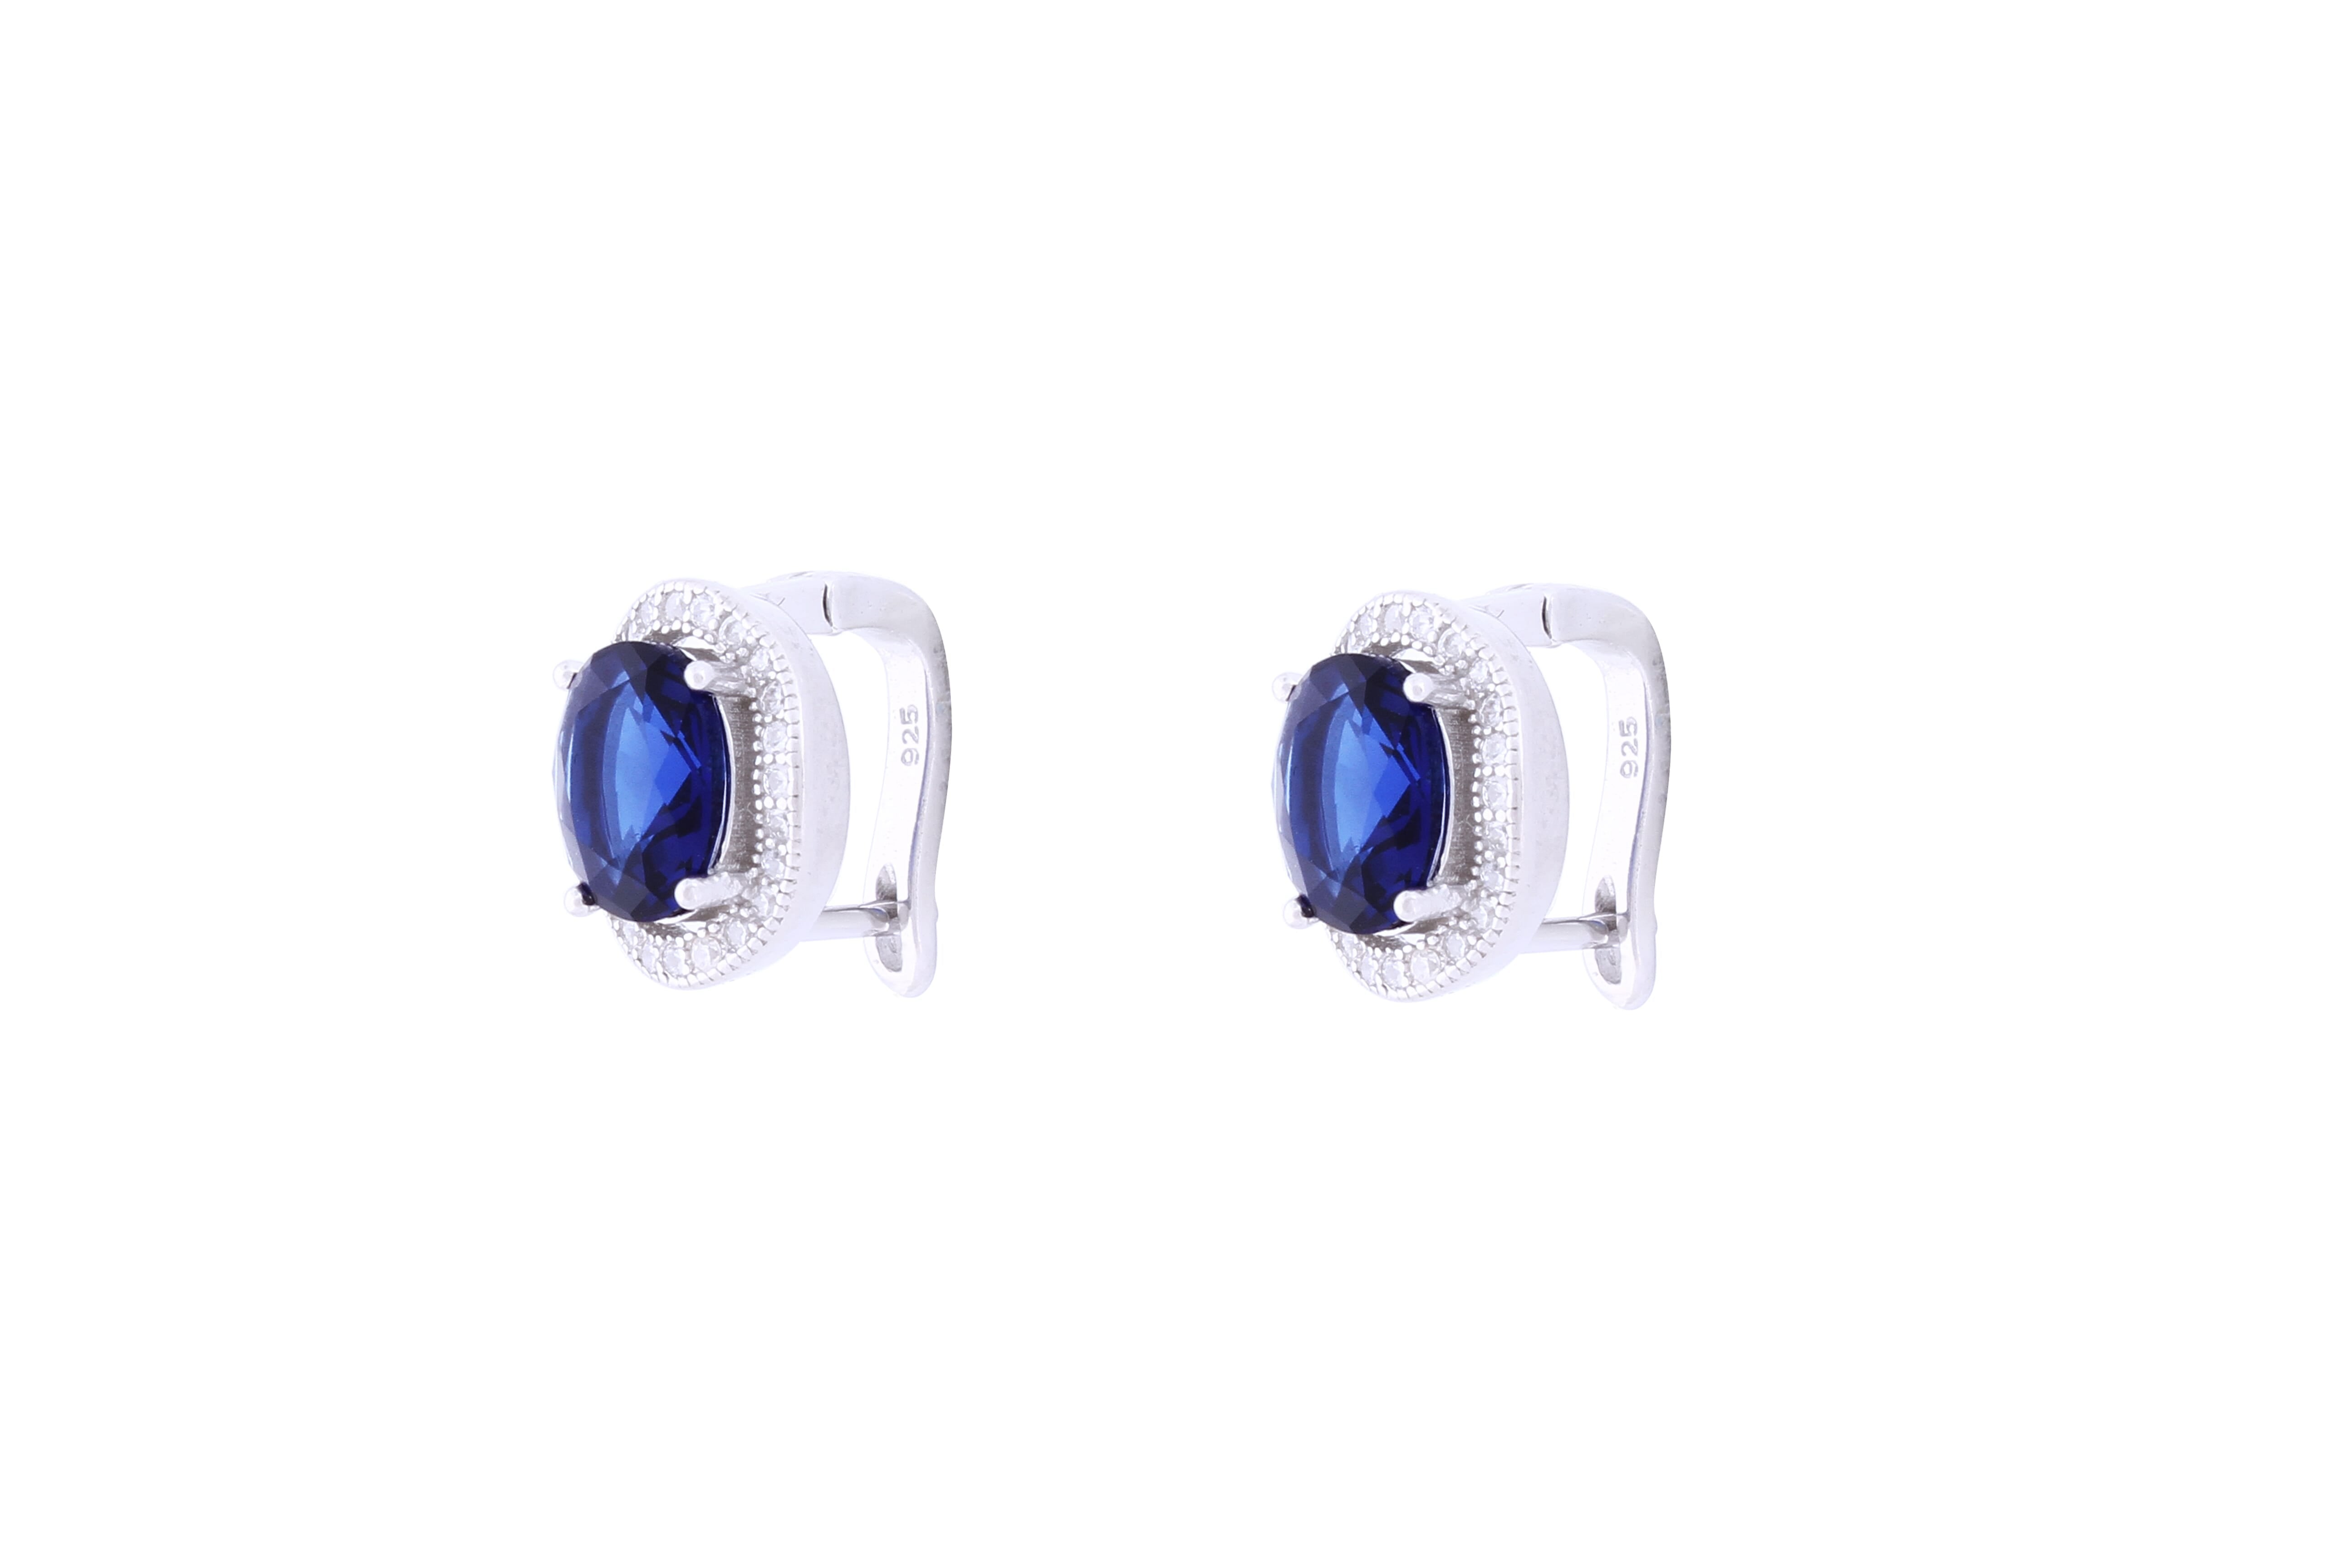 Asfour Crystal Clips Earrings with Blue Oval Design in 925 Sterling Silver ER0364-B